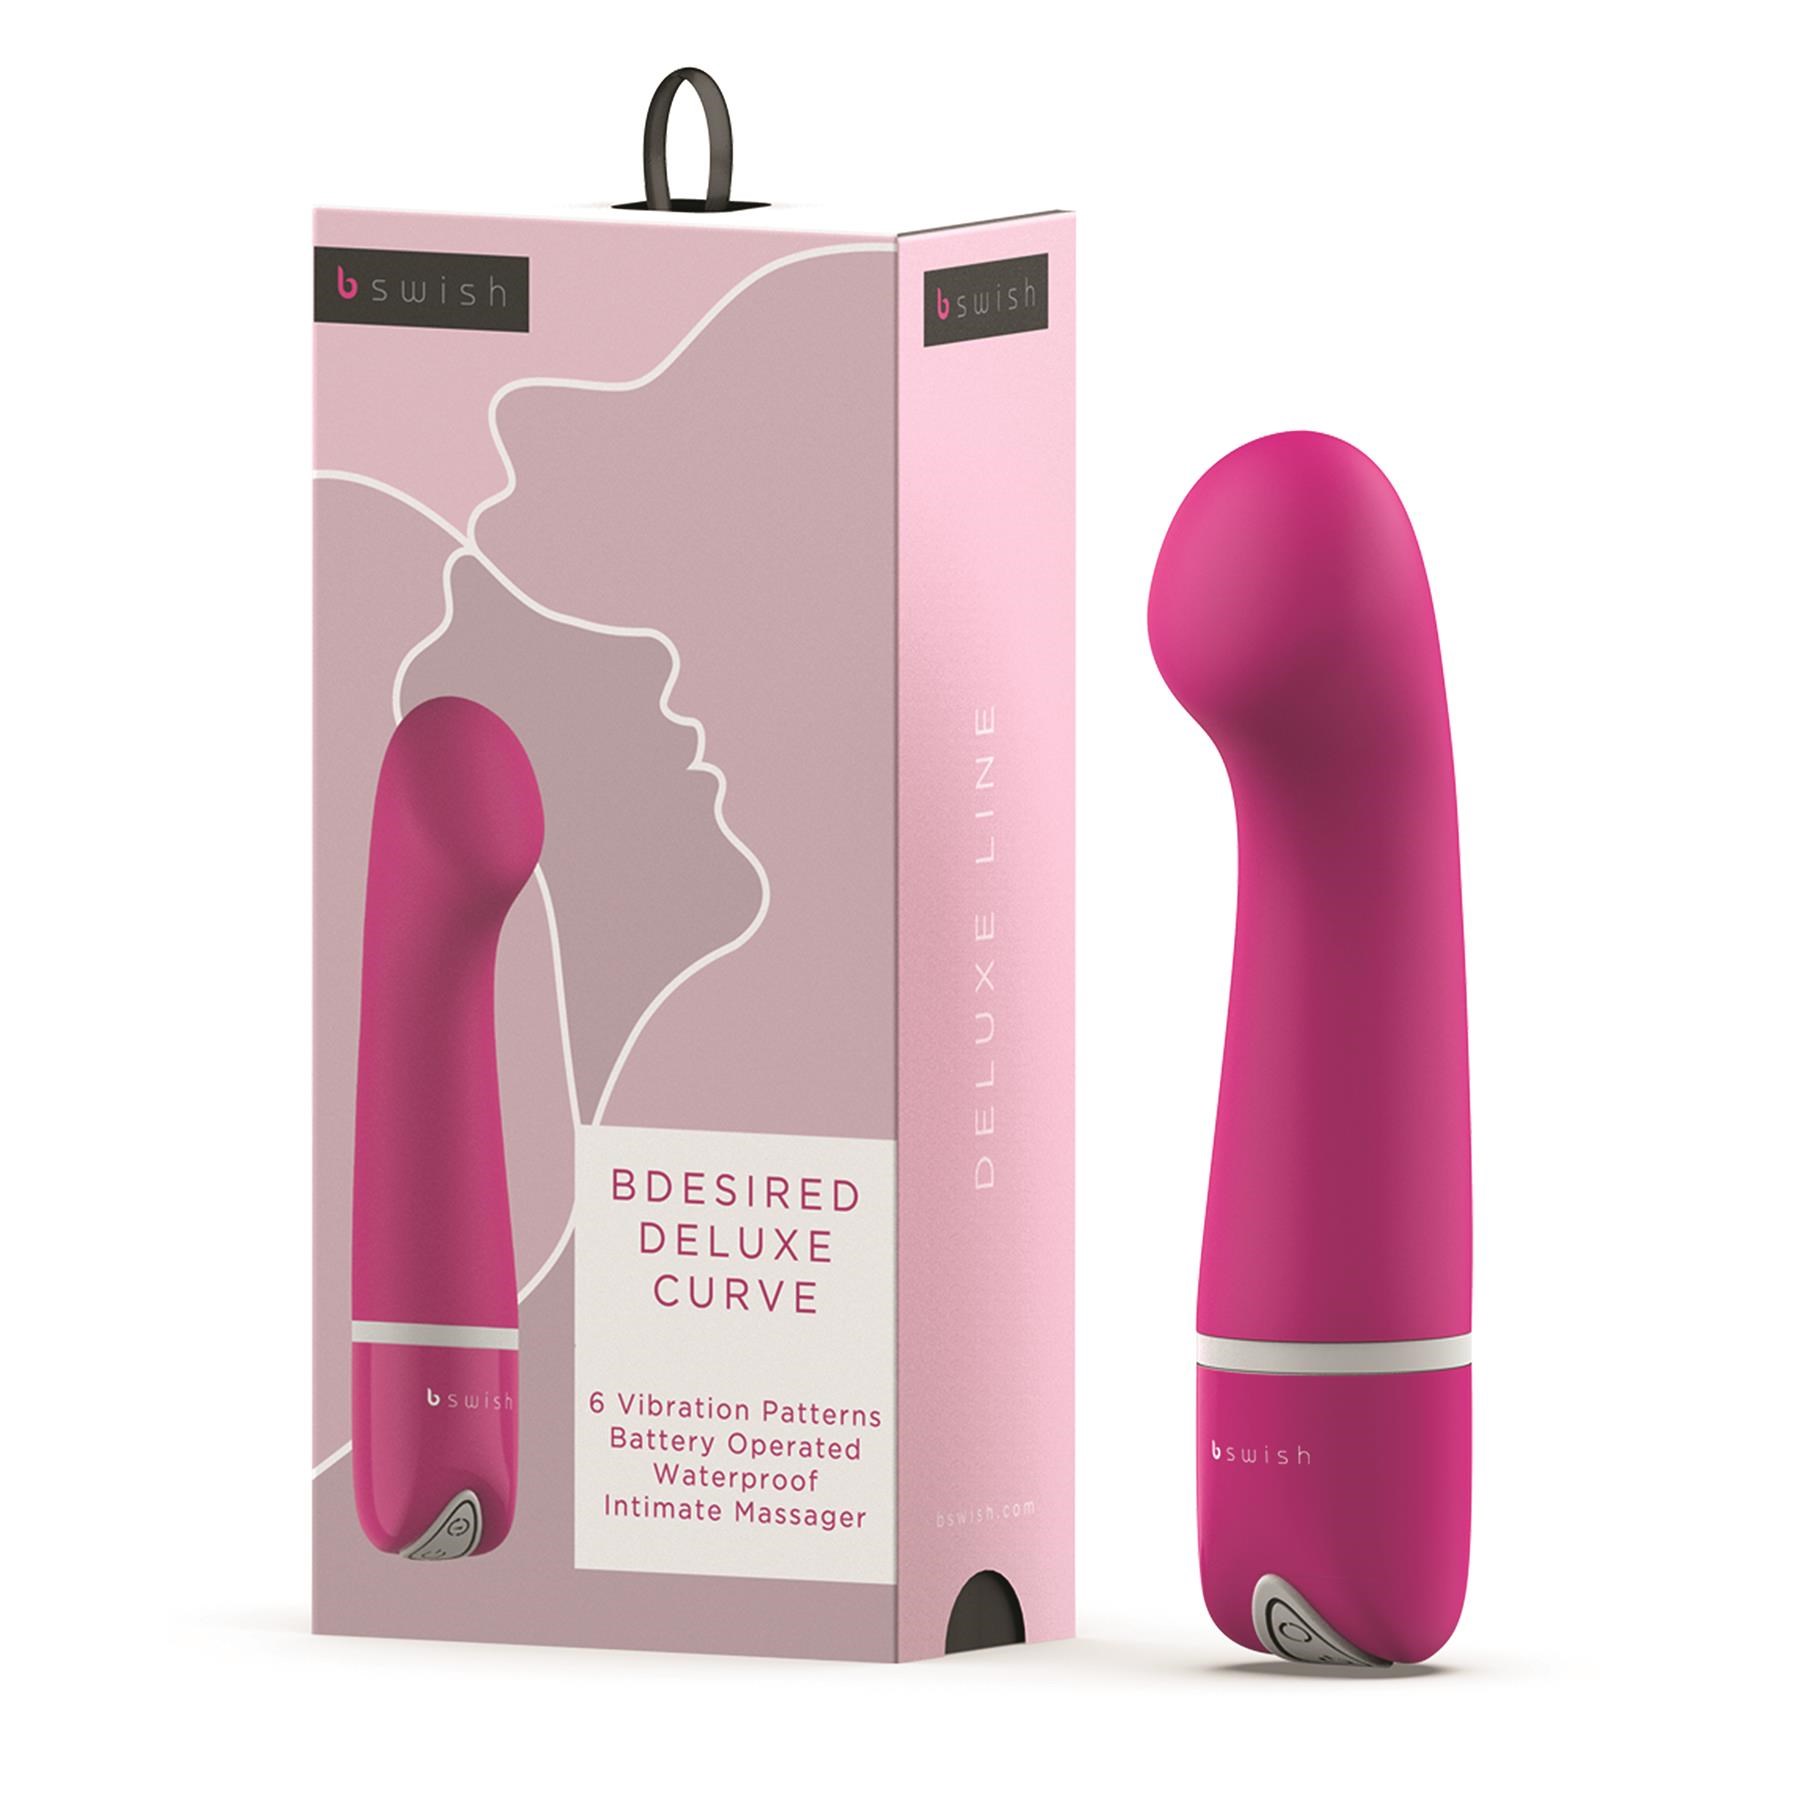 BSwish BDesired Deluxe Curve Mini Massager - Product and Packaging